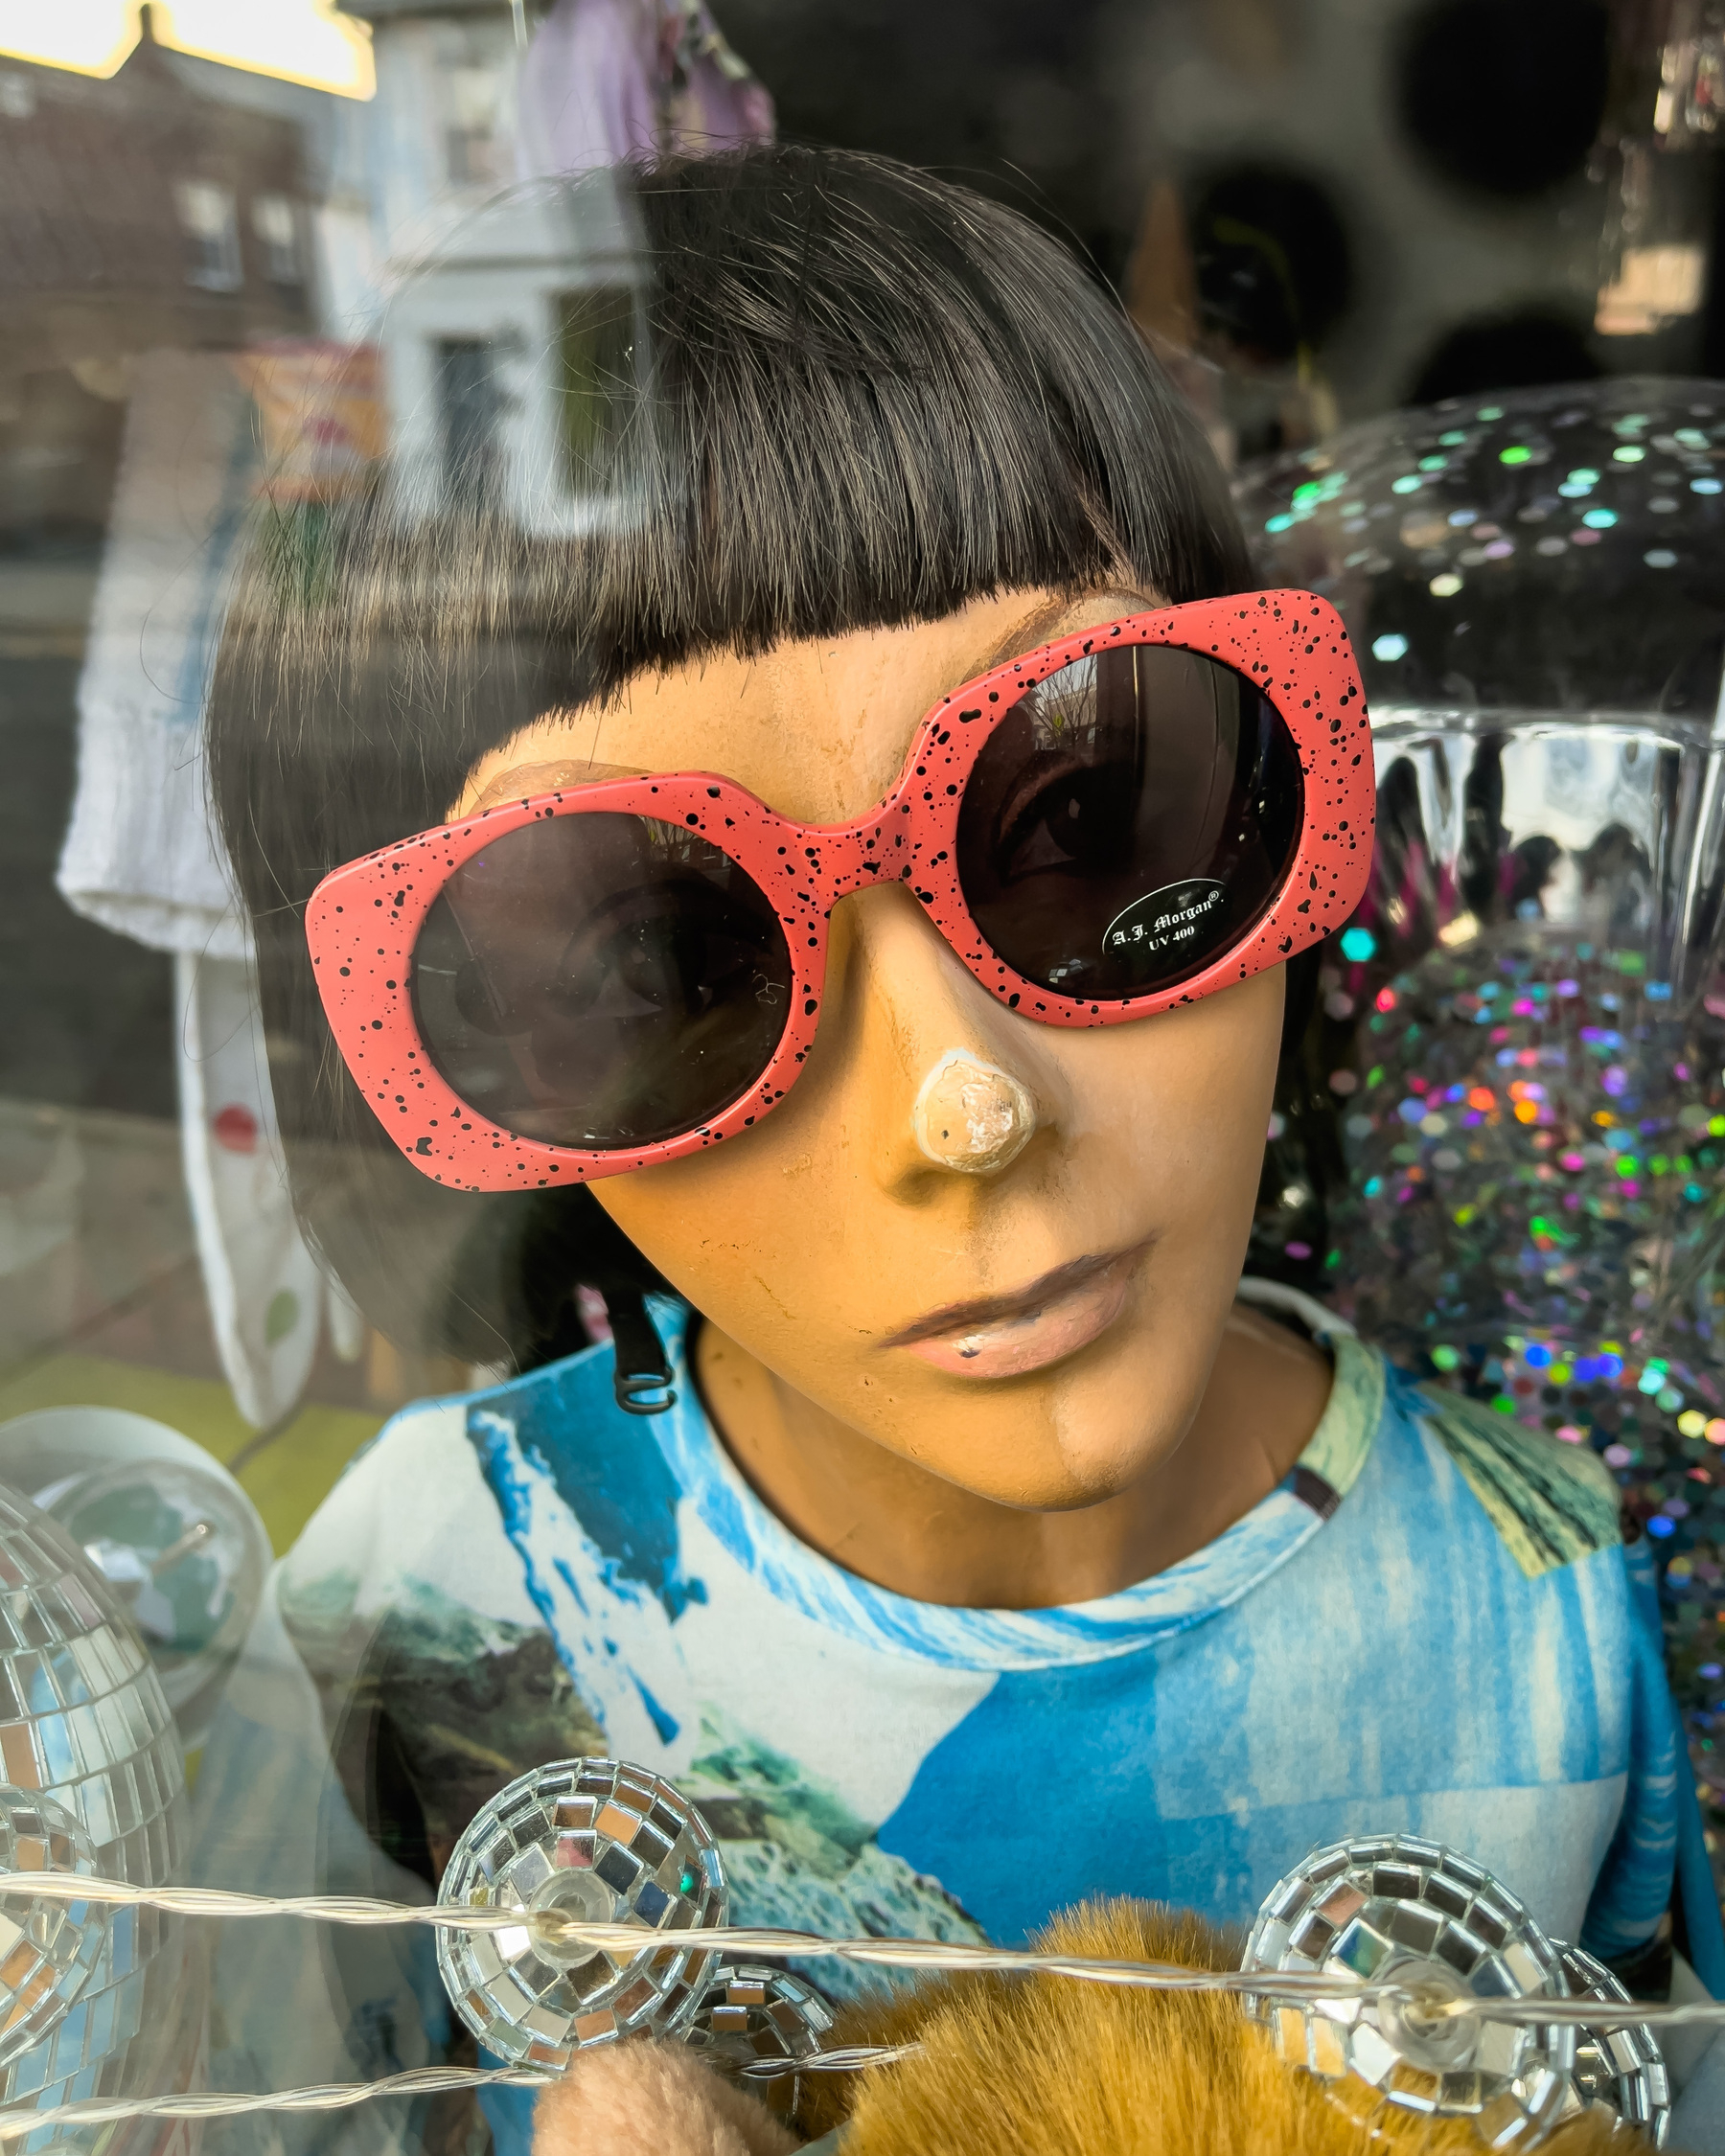 Female mannequin head with sunglasses